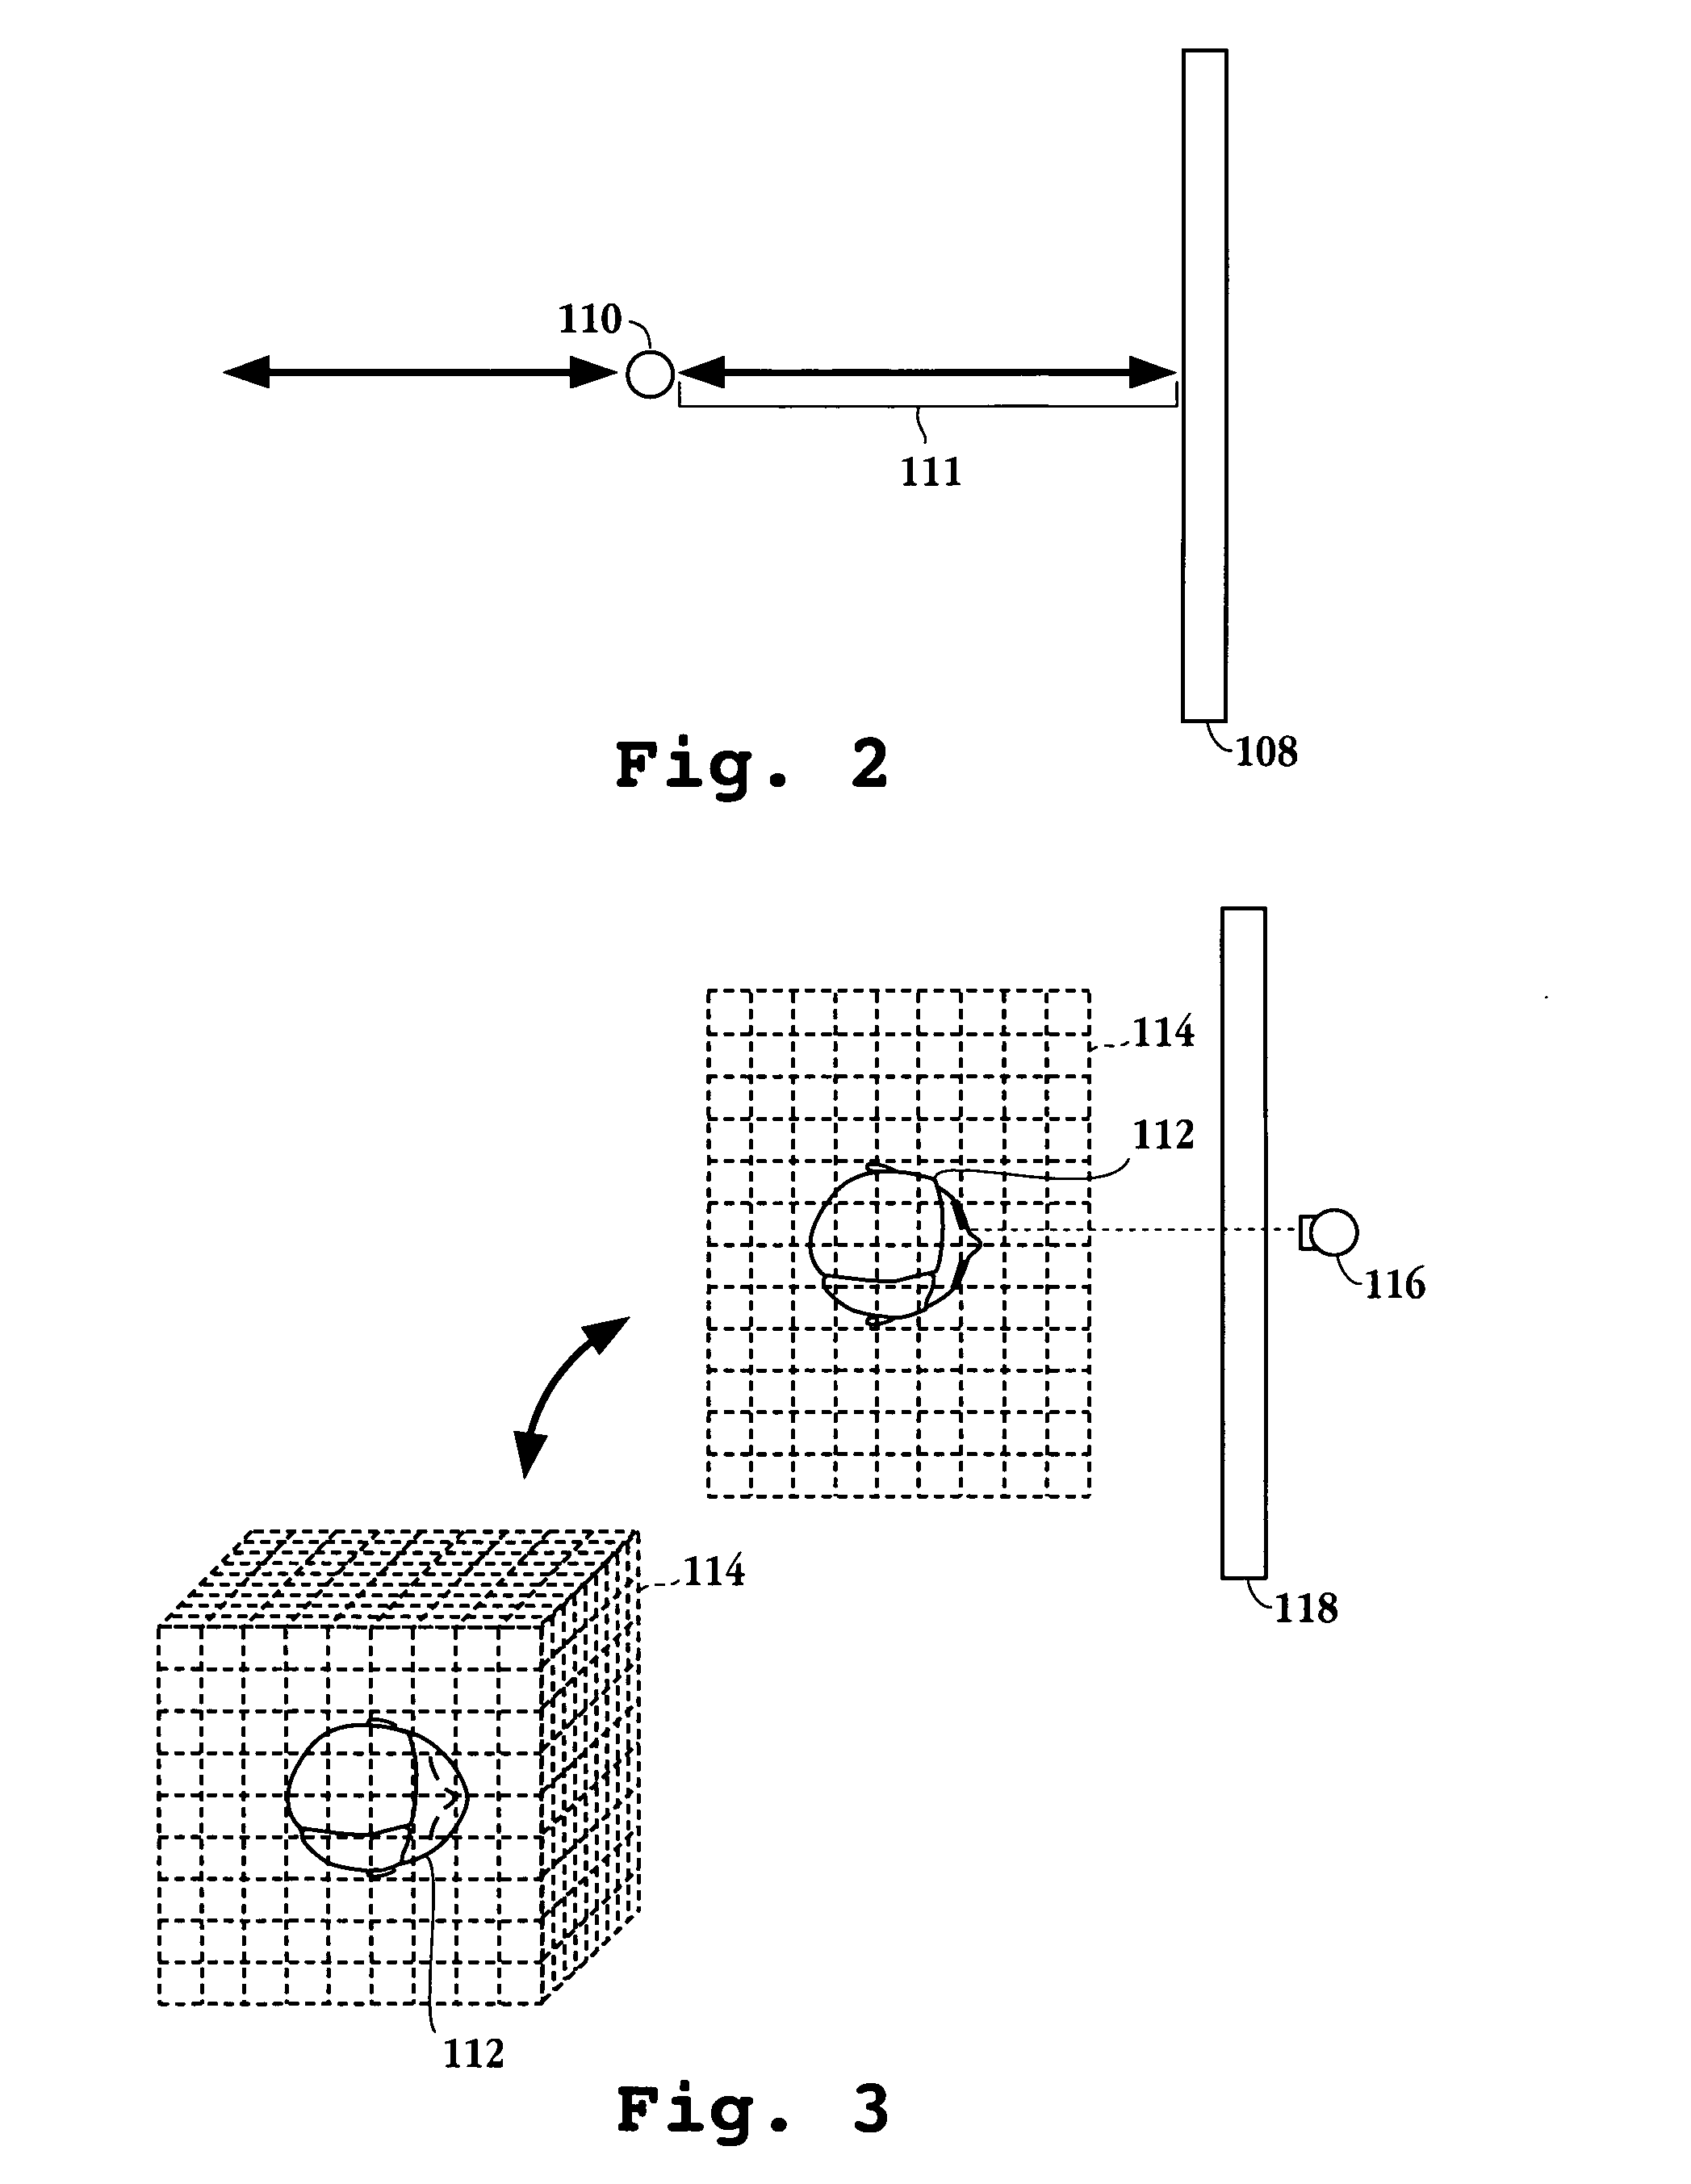 Method and apparatus for adjusting a view of a scene being displayed according to tracked head motion